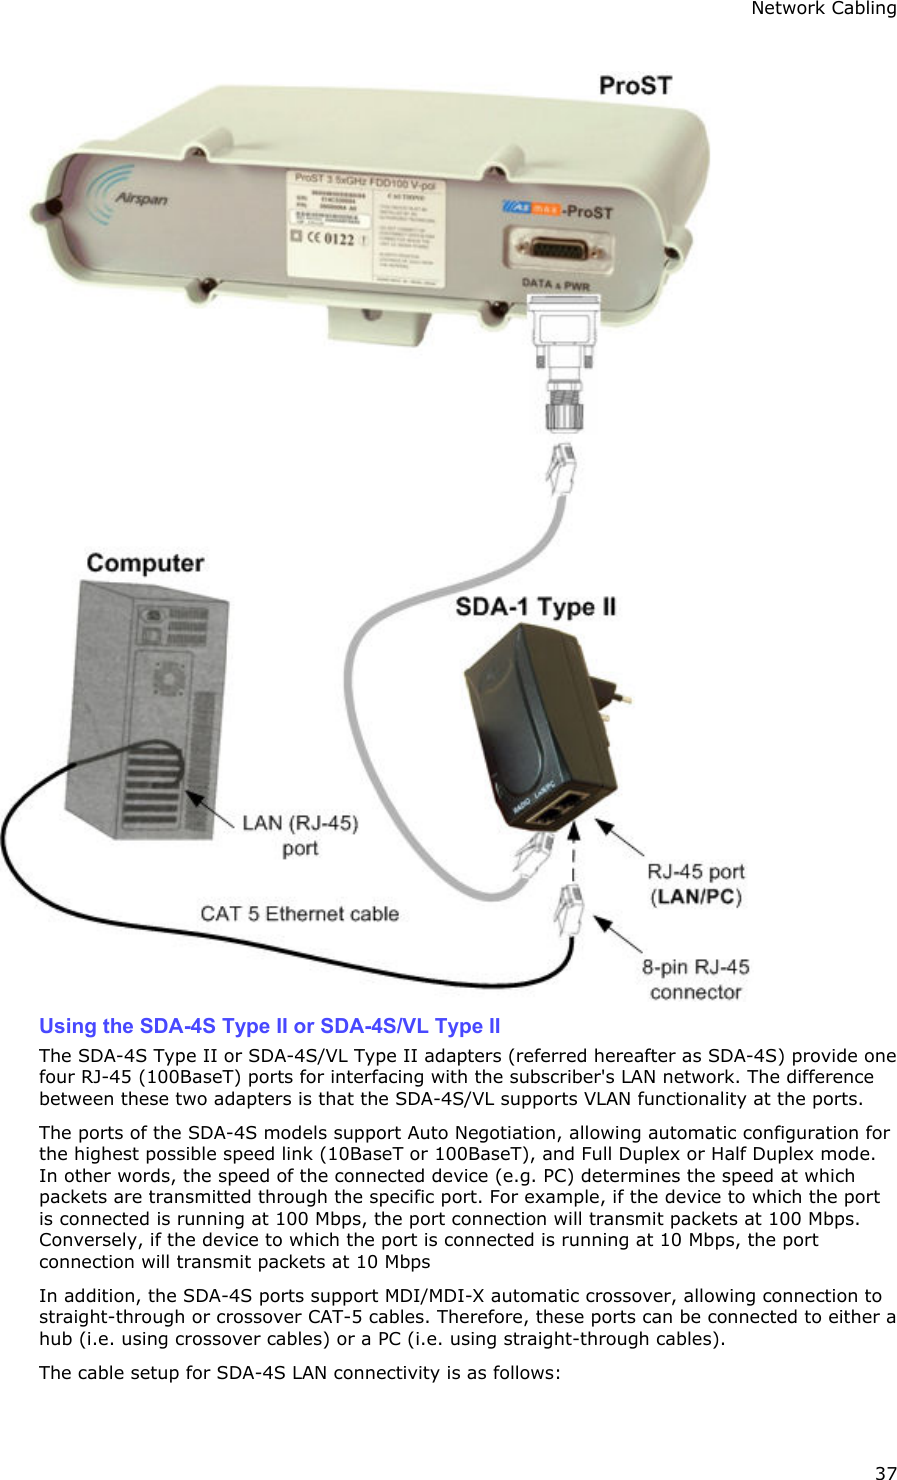 Network Cabling 37  Using the SDA-4S Type II or SDA-4S/VL Type II The SDA-4S Type II or SDA-4S/VL Type II adapters (referred hereafter as SDA-4S) provide one four RJ-45 (100BaseT) ports for interfacing with the subscriber&apos;s LAN network. The difference between these two adapters is that the SDA-4S/VL supports VLAN functionality at the ports. The ports of the SDA-4S models support Auto Negotiation, allowing automatic configuration for the highest possible speed link (10BaseT or 100BaseT), and Full Duplex or Half Duplex mode. In other words, the speed of the connected device (e.g. PC) determines the speed at which packets are transmitted through the specific port. For example, if the device to which the port is connected is running at 100 Mbps, the port connection will transmit packets at 100 Mbps. Conversely, if the device to which the port is connected is running at 10 Mbps, the port connection will transmit packets at 10 Mbps In addition, the SDA-4S ports support MDI/MDI-X automatic crossover, allowing connection to straight-through or crossover CAT-5 cables. Therefore, these ports can be connected to either a hub (i.e. using crossover cables) or a PC (i.e. using straight-through cables). The cable setup for SDA-4S LAN connectivity is as follows: 